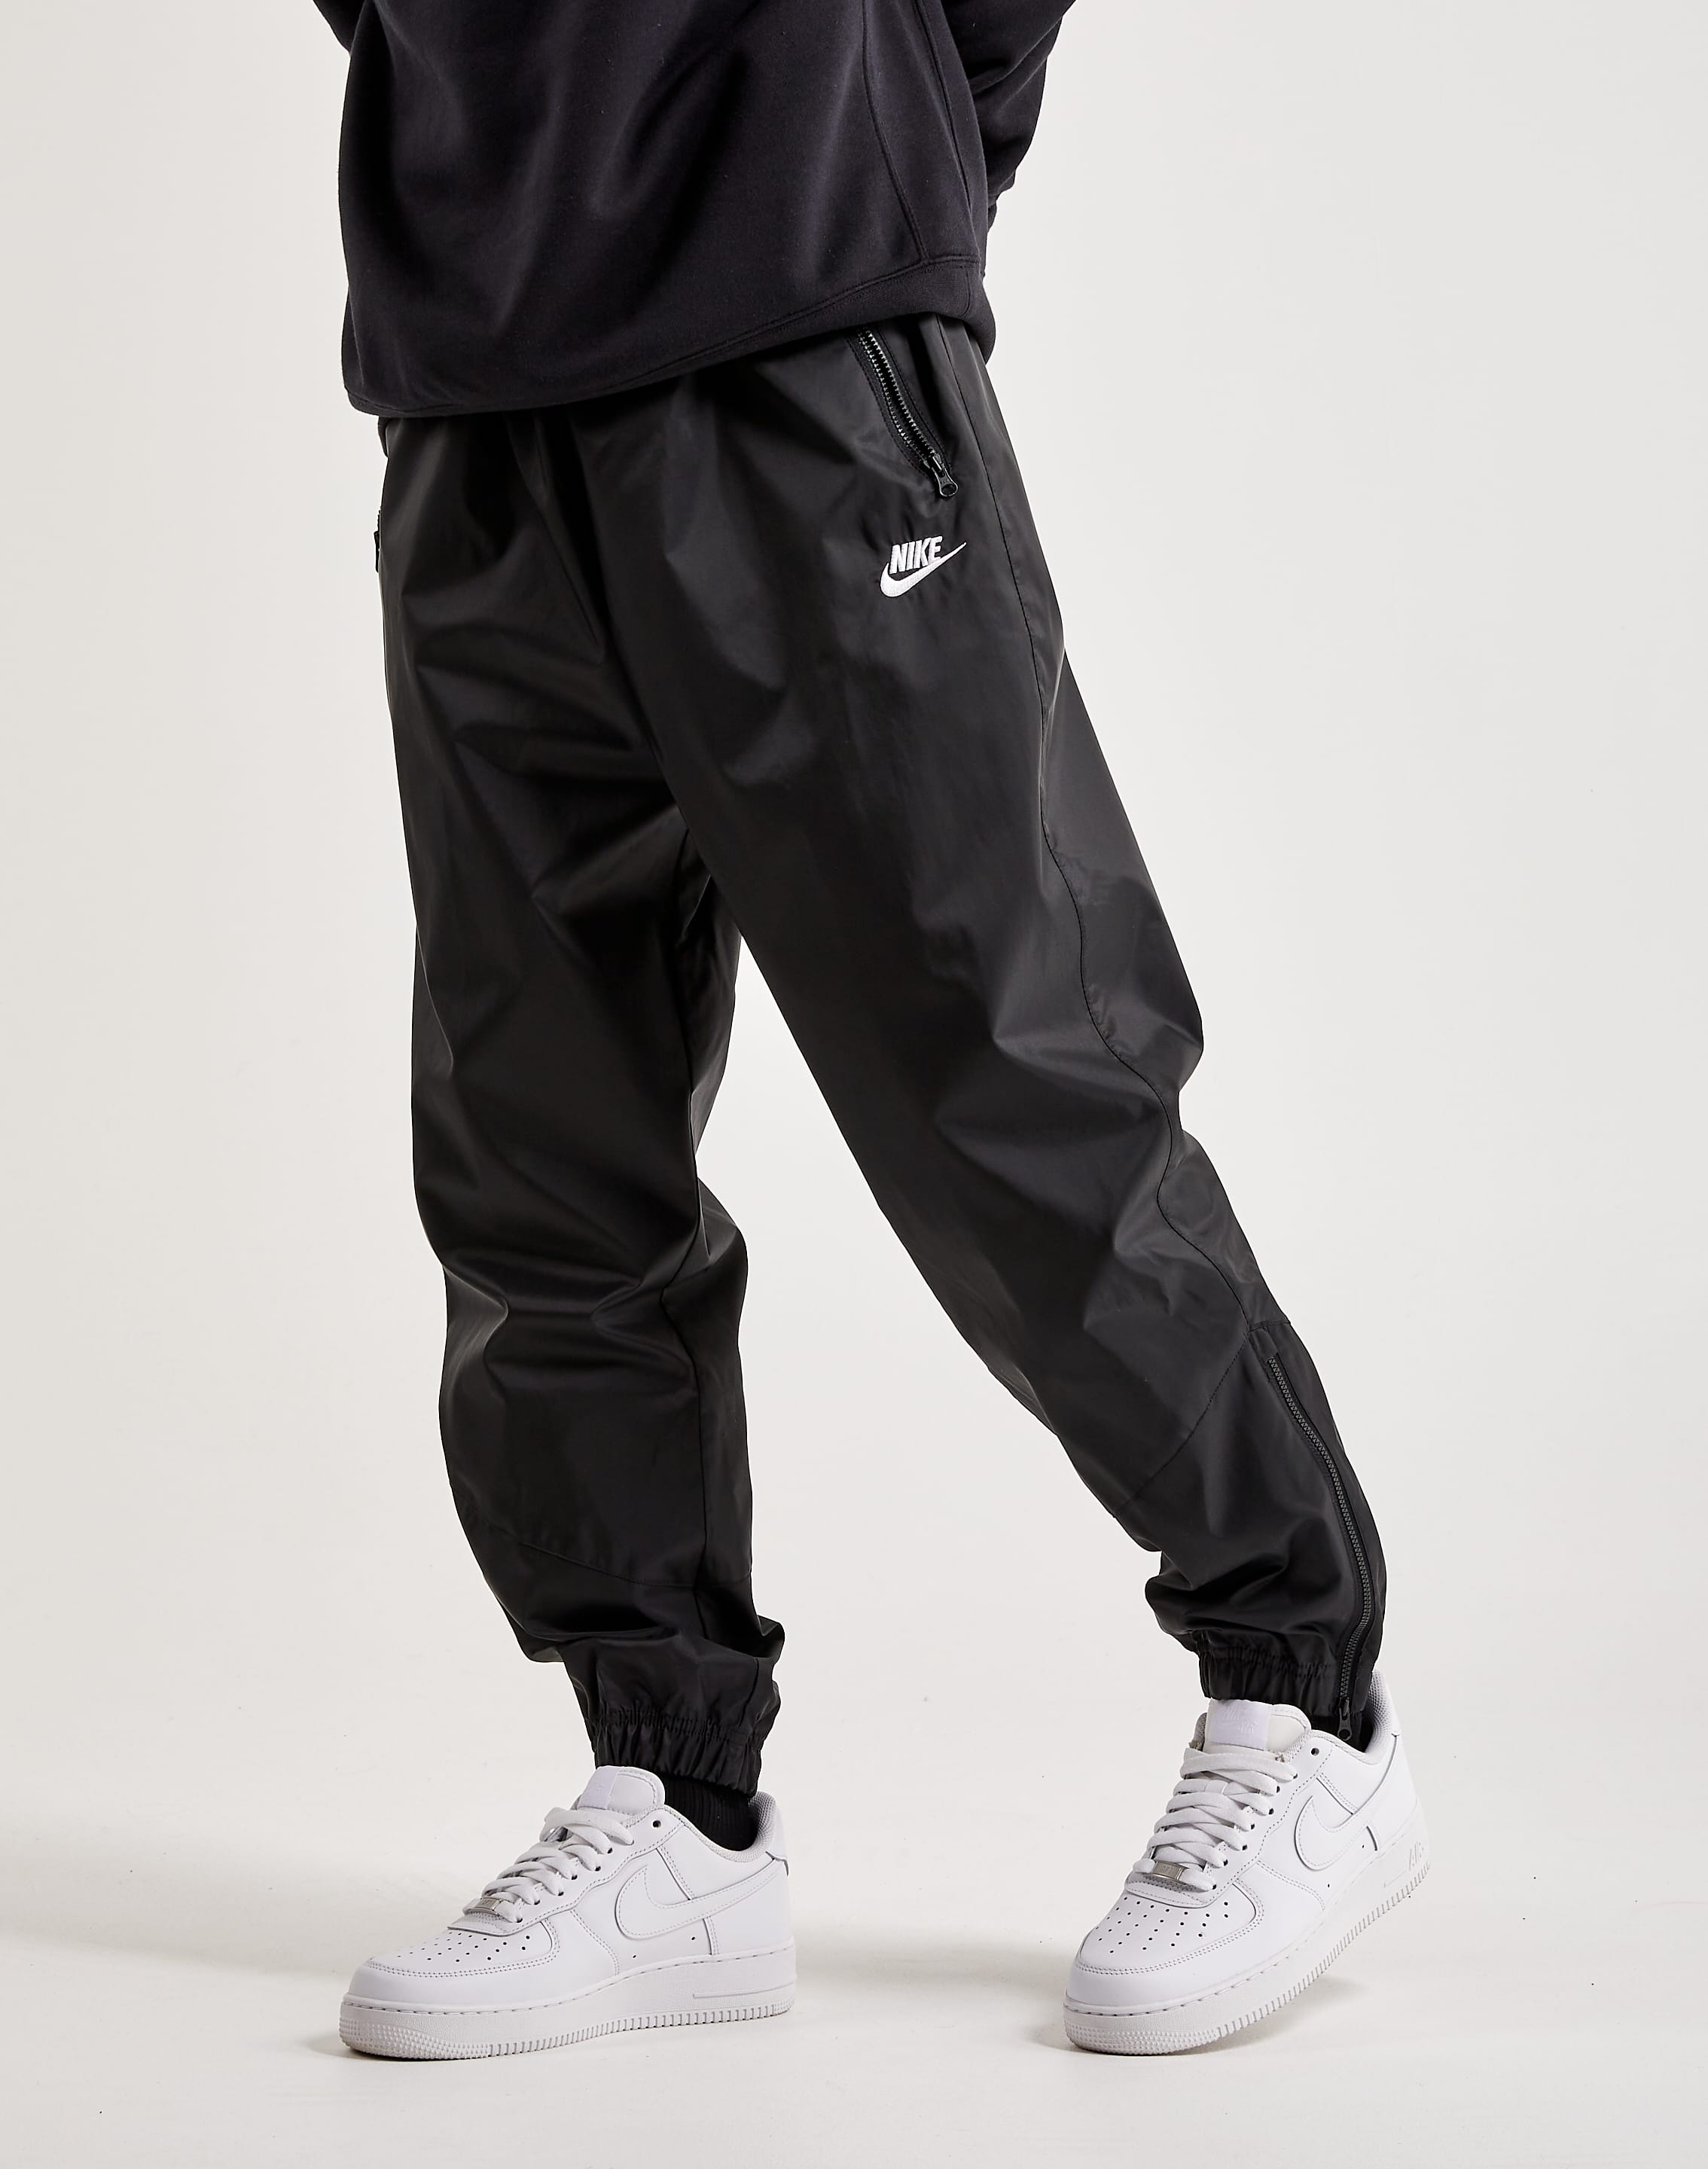 Nike Gray Essentials Sweatpants | Outfits with leggings, Shoes to wear with  sweatpants, Sweatpants